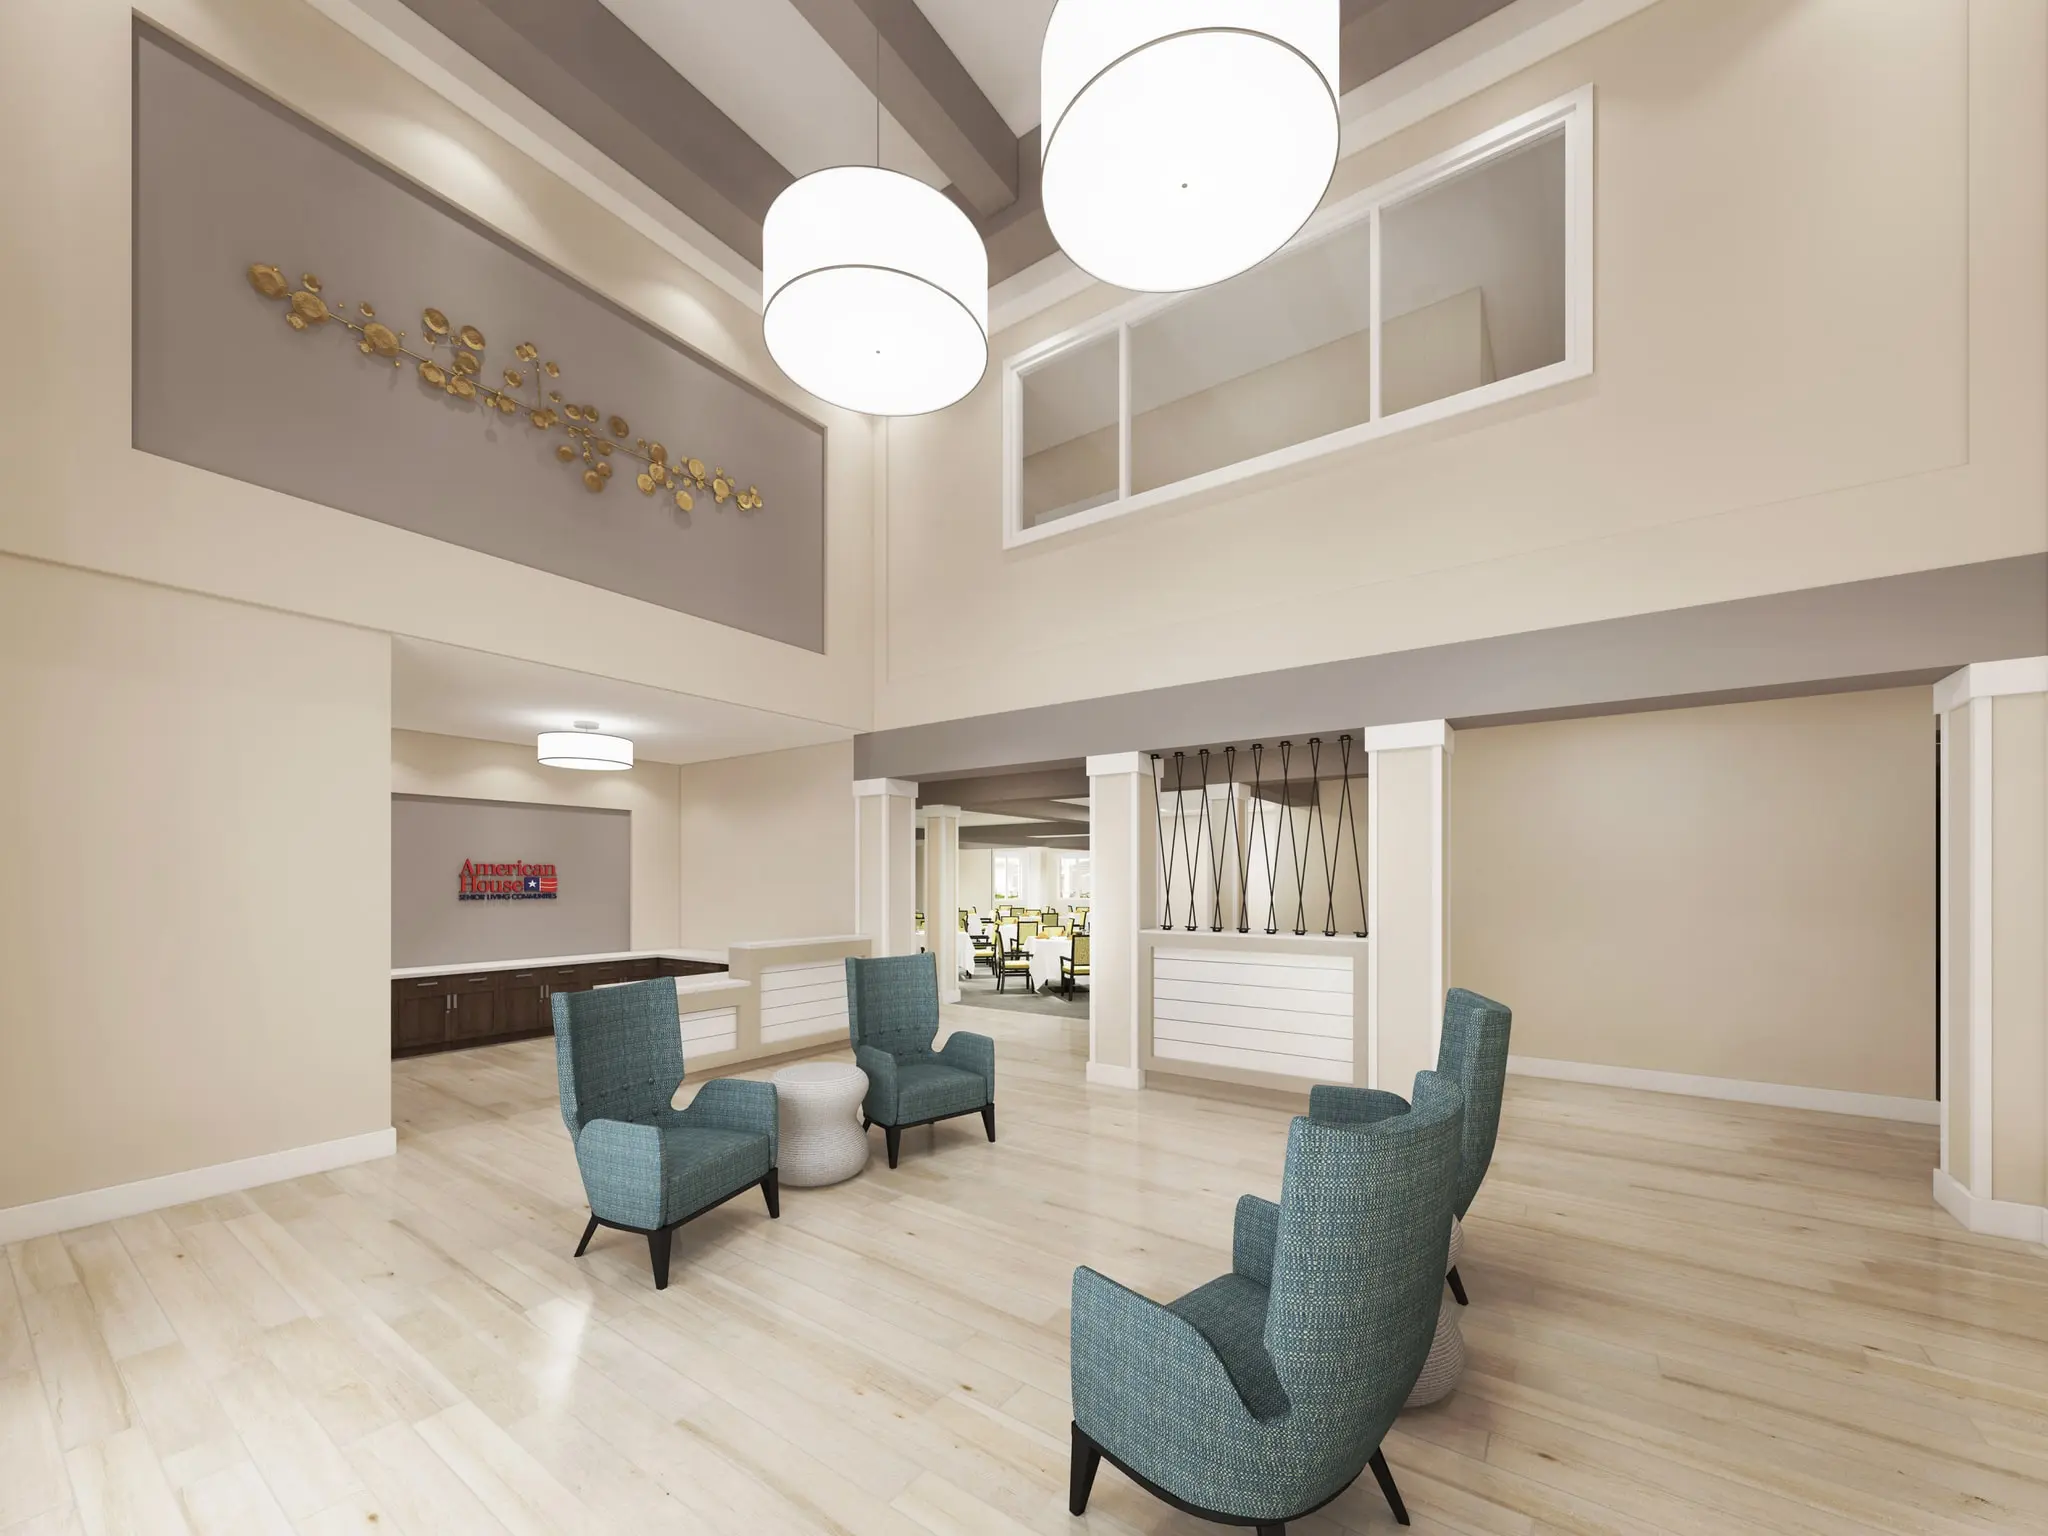 Foyer at American House assisted living in St. Petersburg, FL